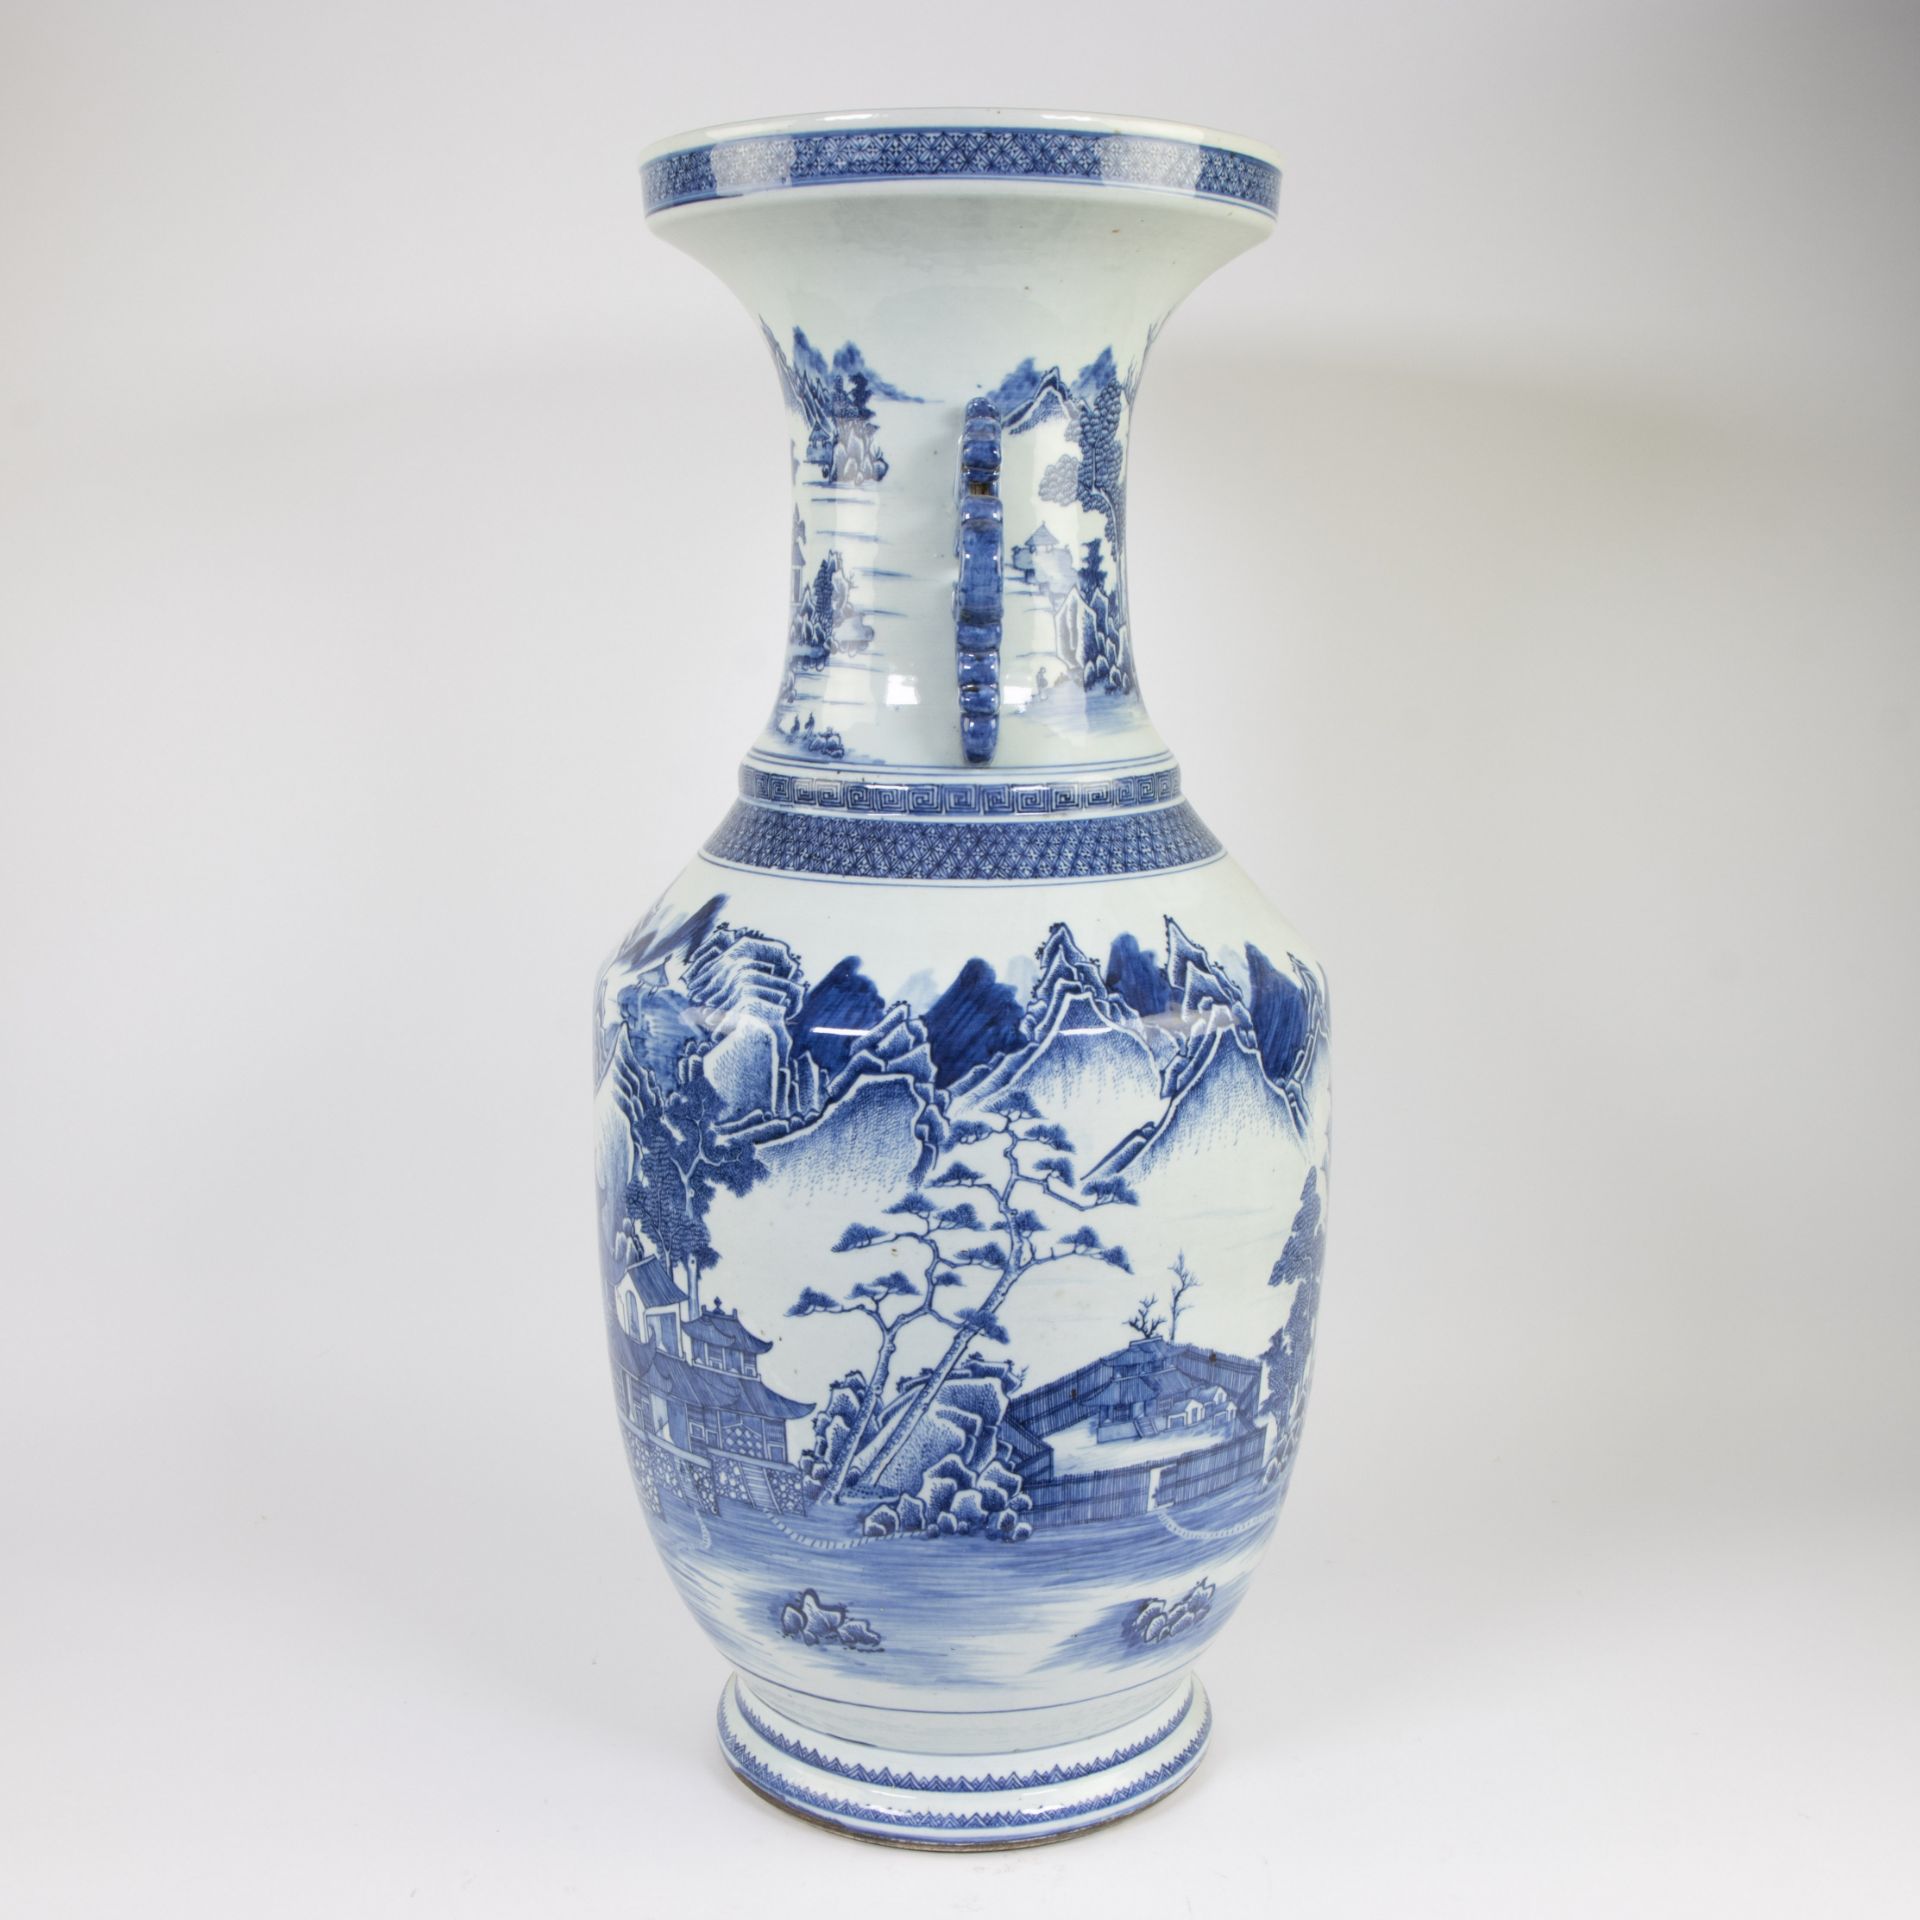 Large Chinese vase blue/white with floral mountain decor, late 19th century - Image 2 of 8